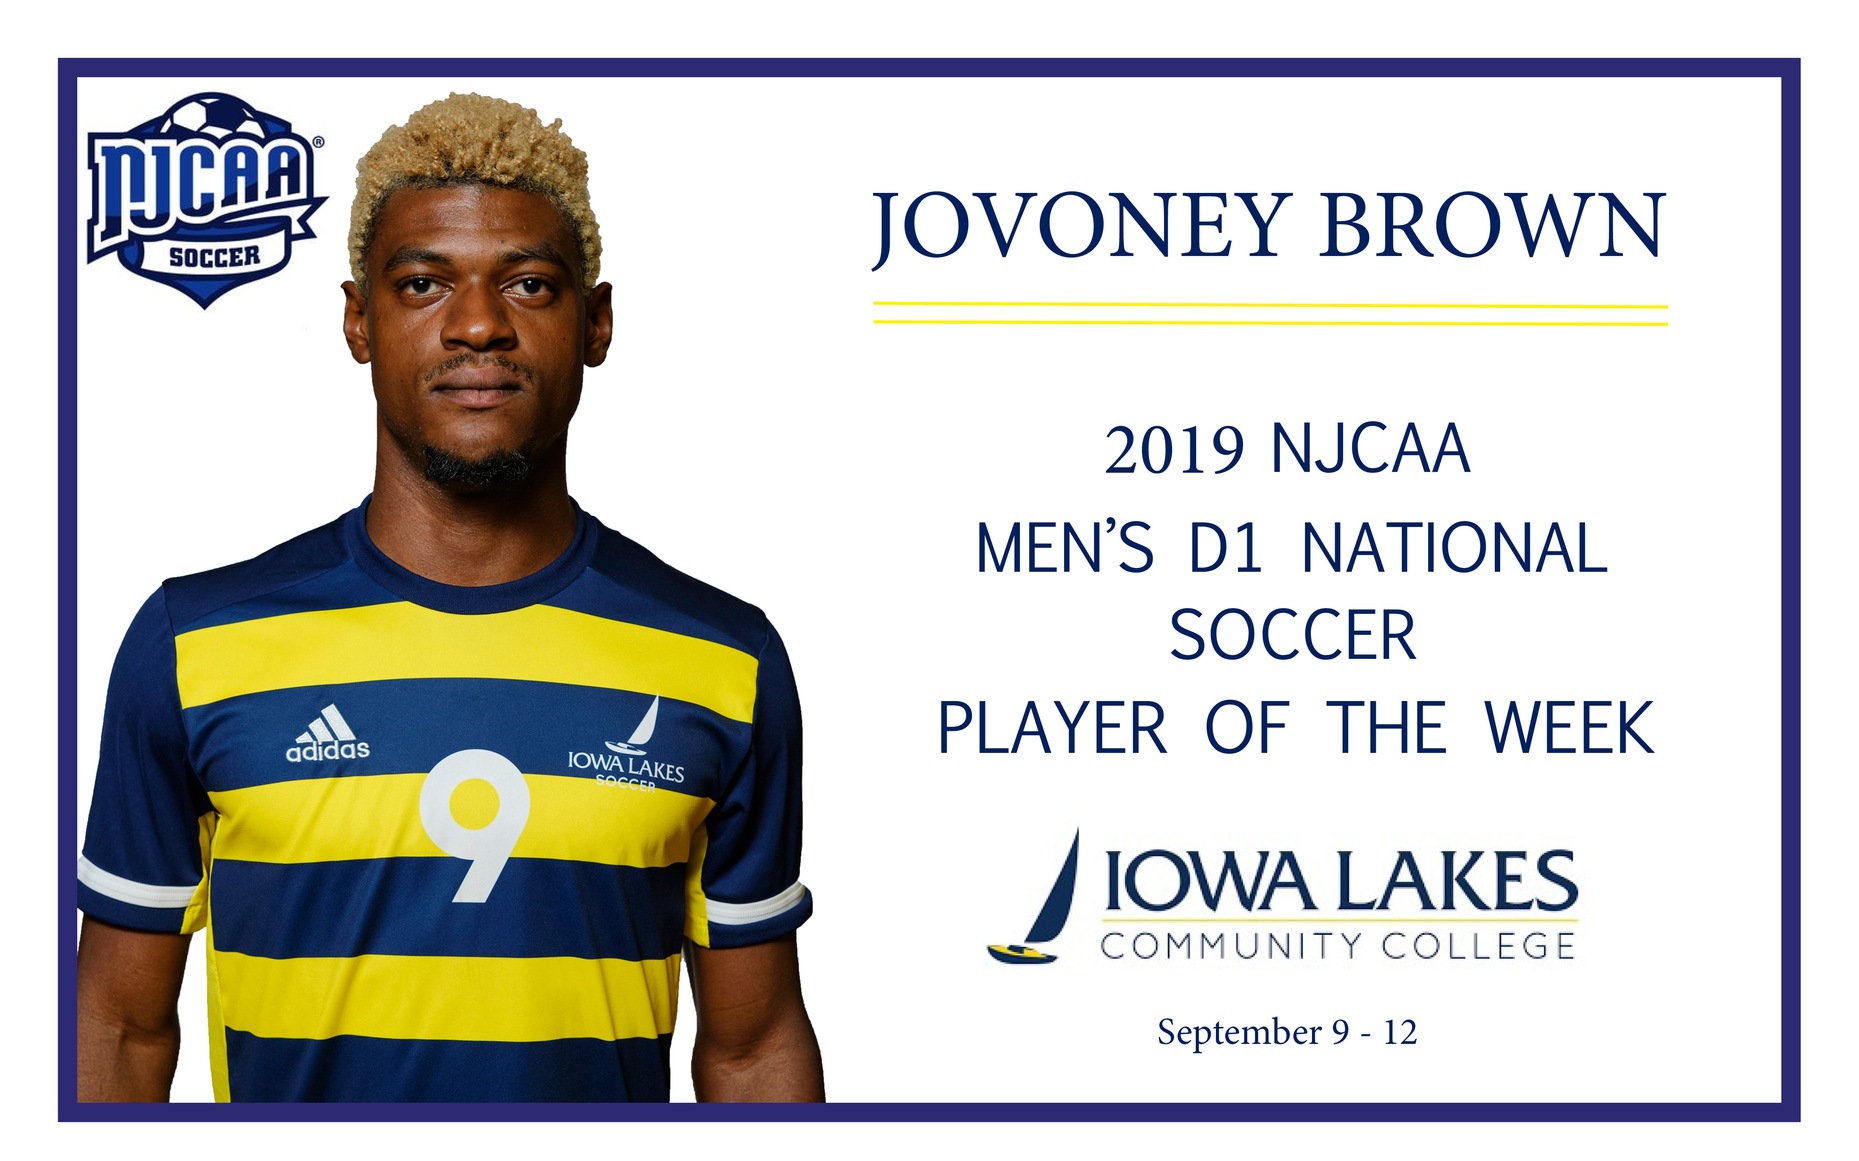 JOVONEY BROWN NAMED NJCAA NATIONAL SOCCER PLAYER OF THE WEEK